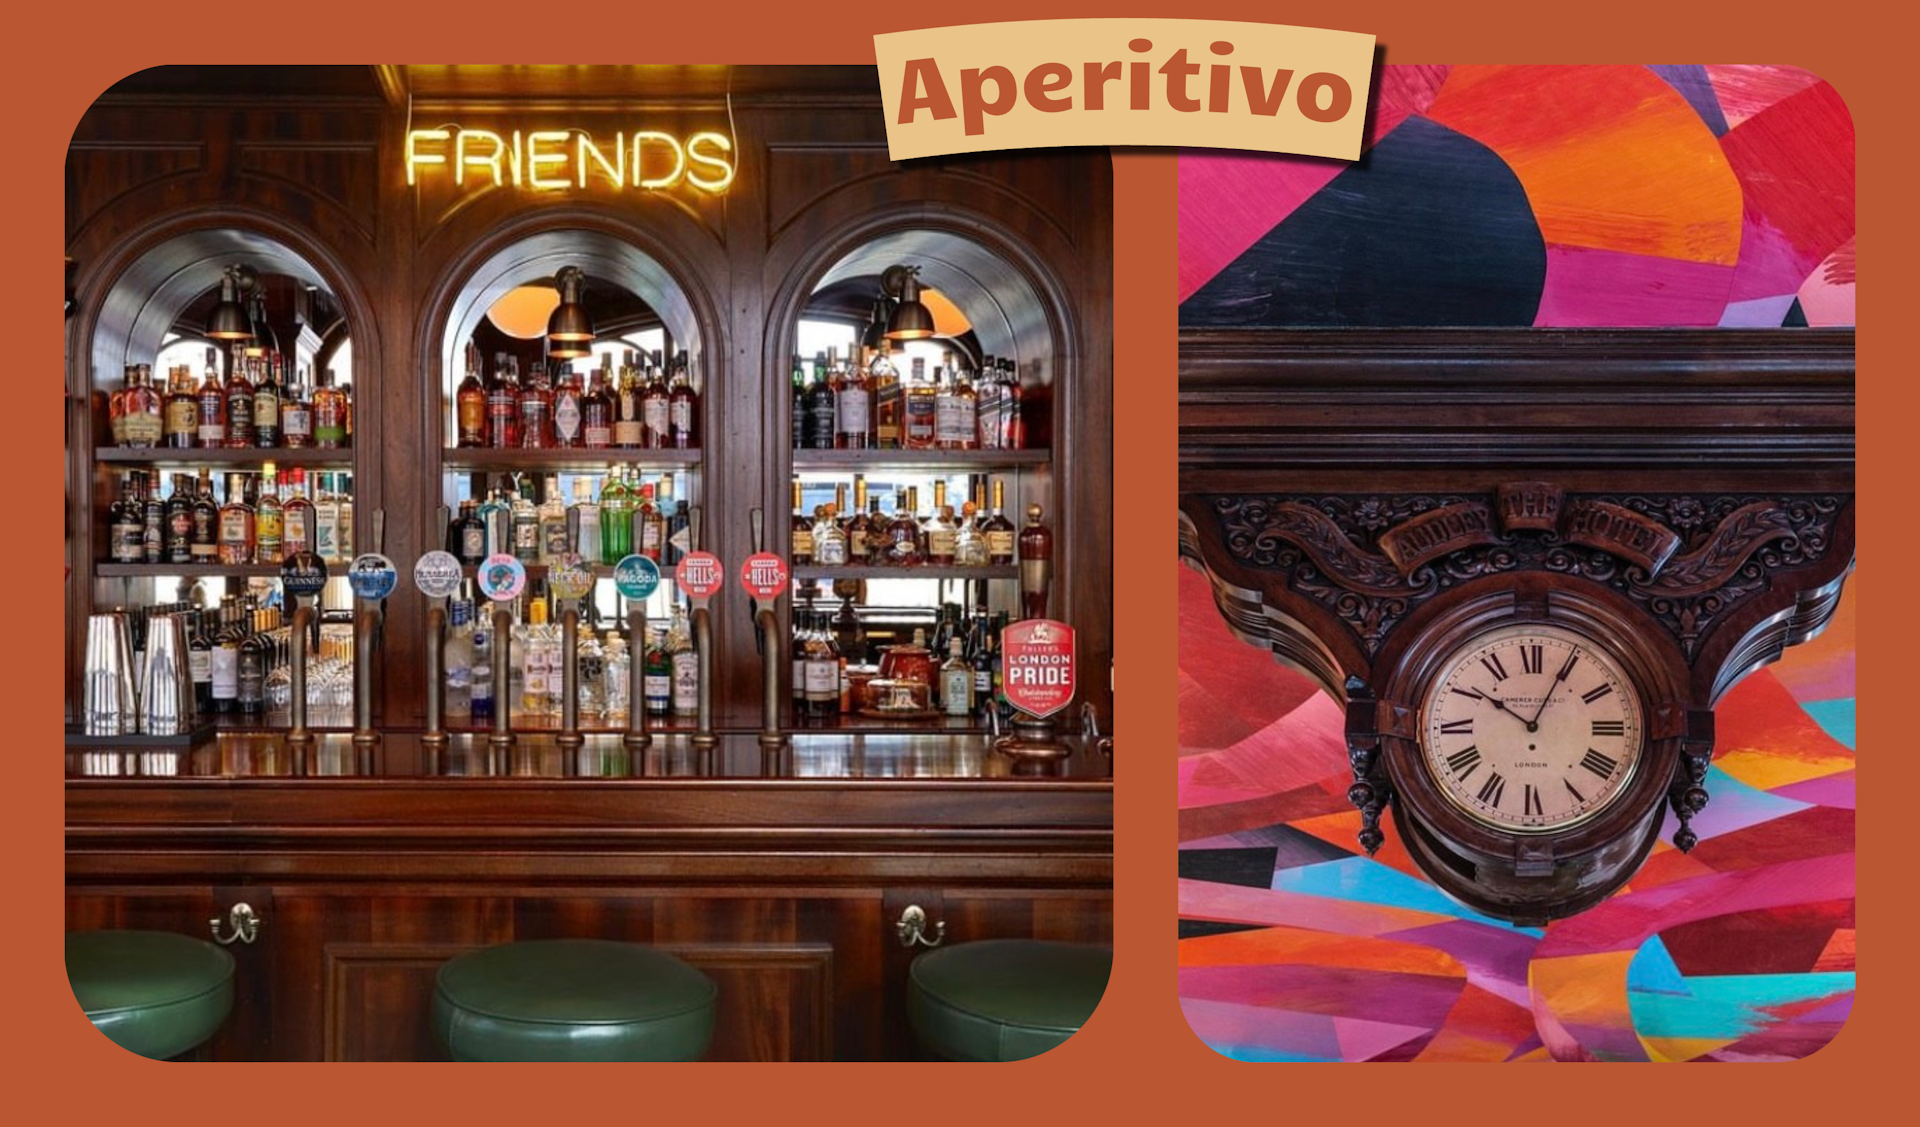 L: Wood-panelled bar in London. R: Multicoloured ceiling design with old-fashioned clock